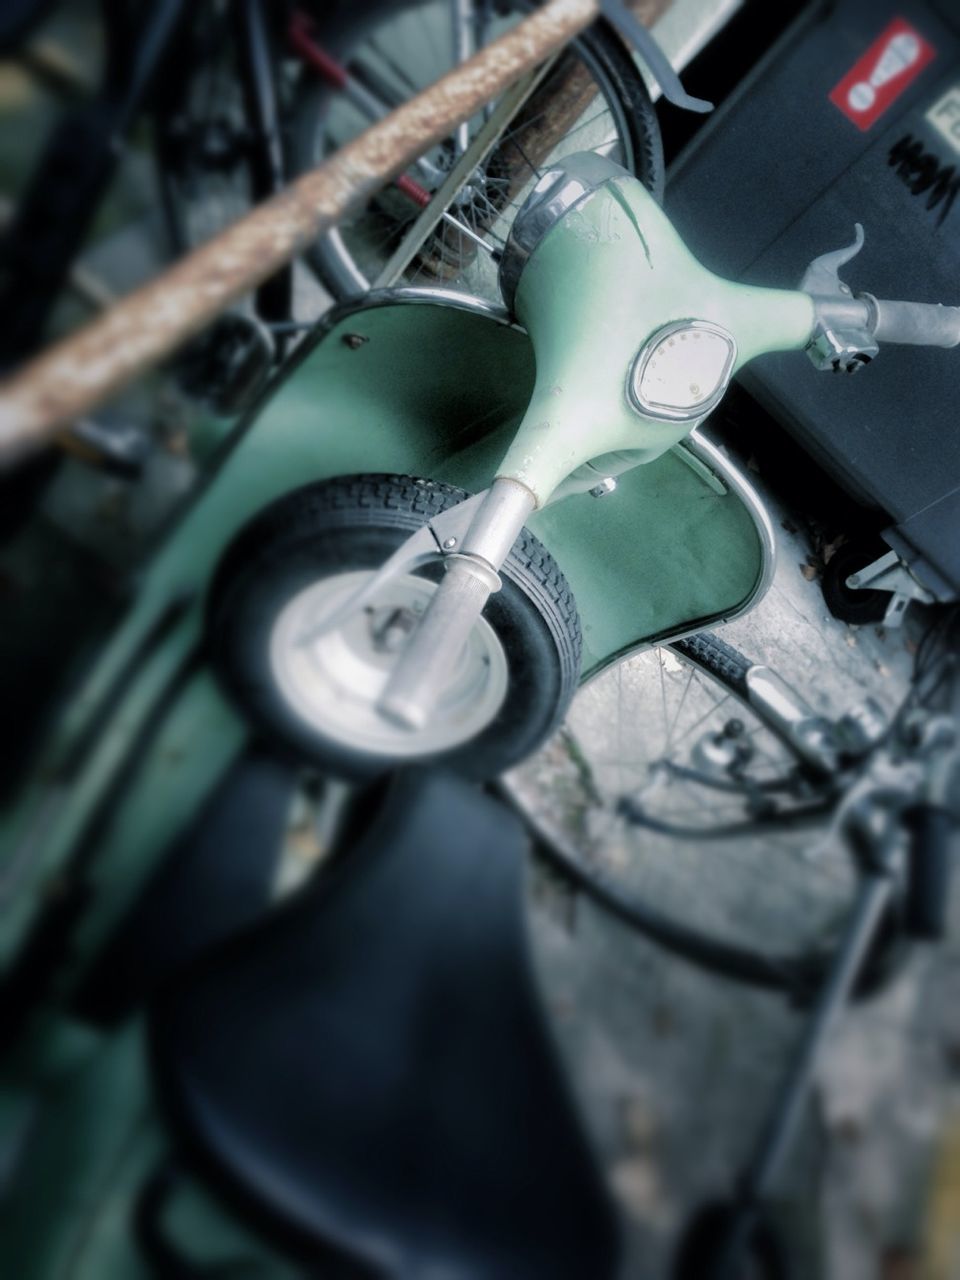 transportation, land vehicle, mode of transport, car, close-up, metal, stationary, part of, high angle view, wheel, motorcycle, selective focus, no people, machine part, vehicle part, technology, bicycle, metallic, focus on foreground, equipment